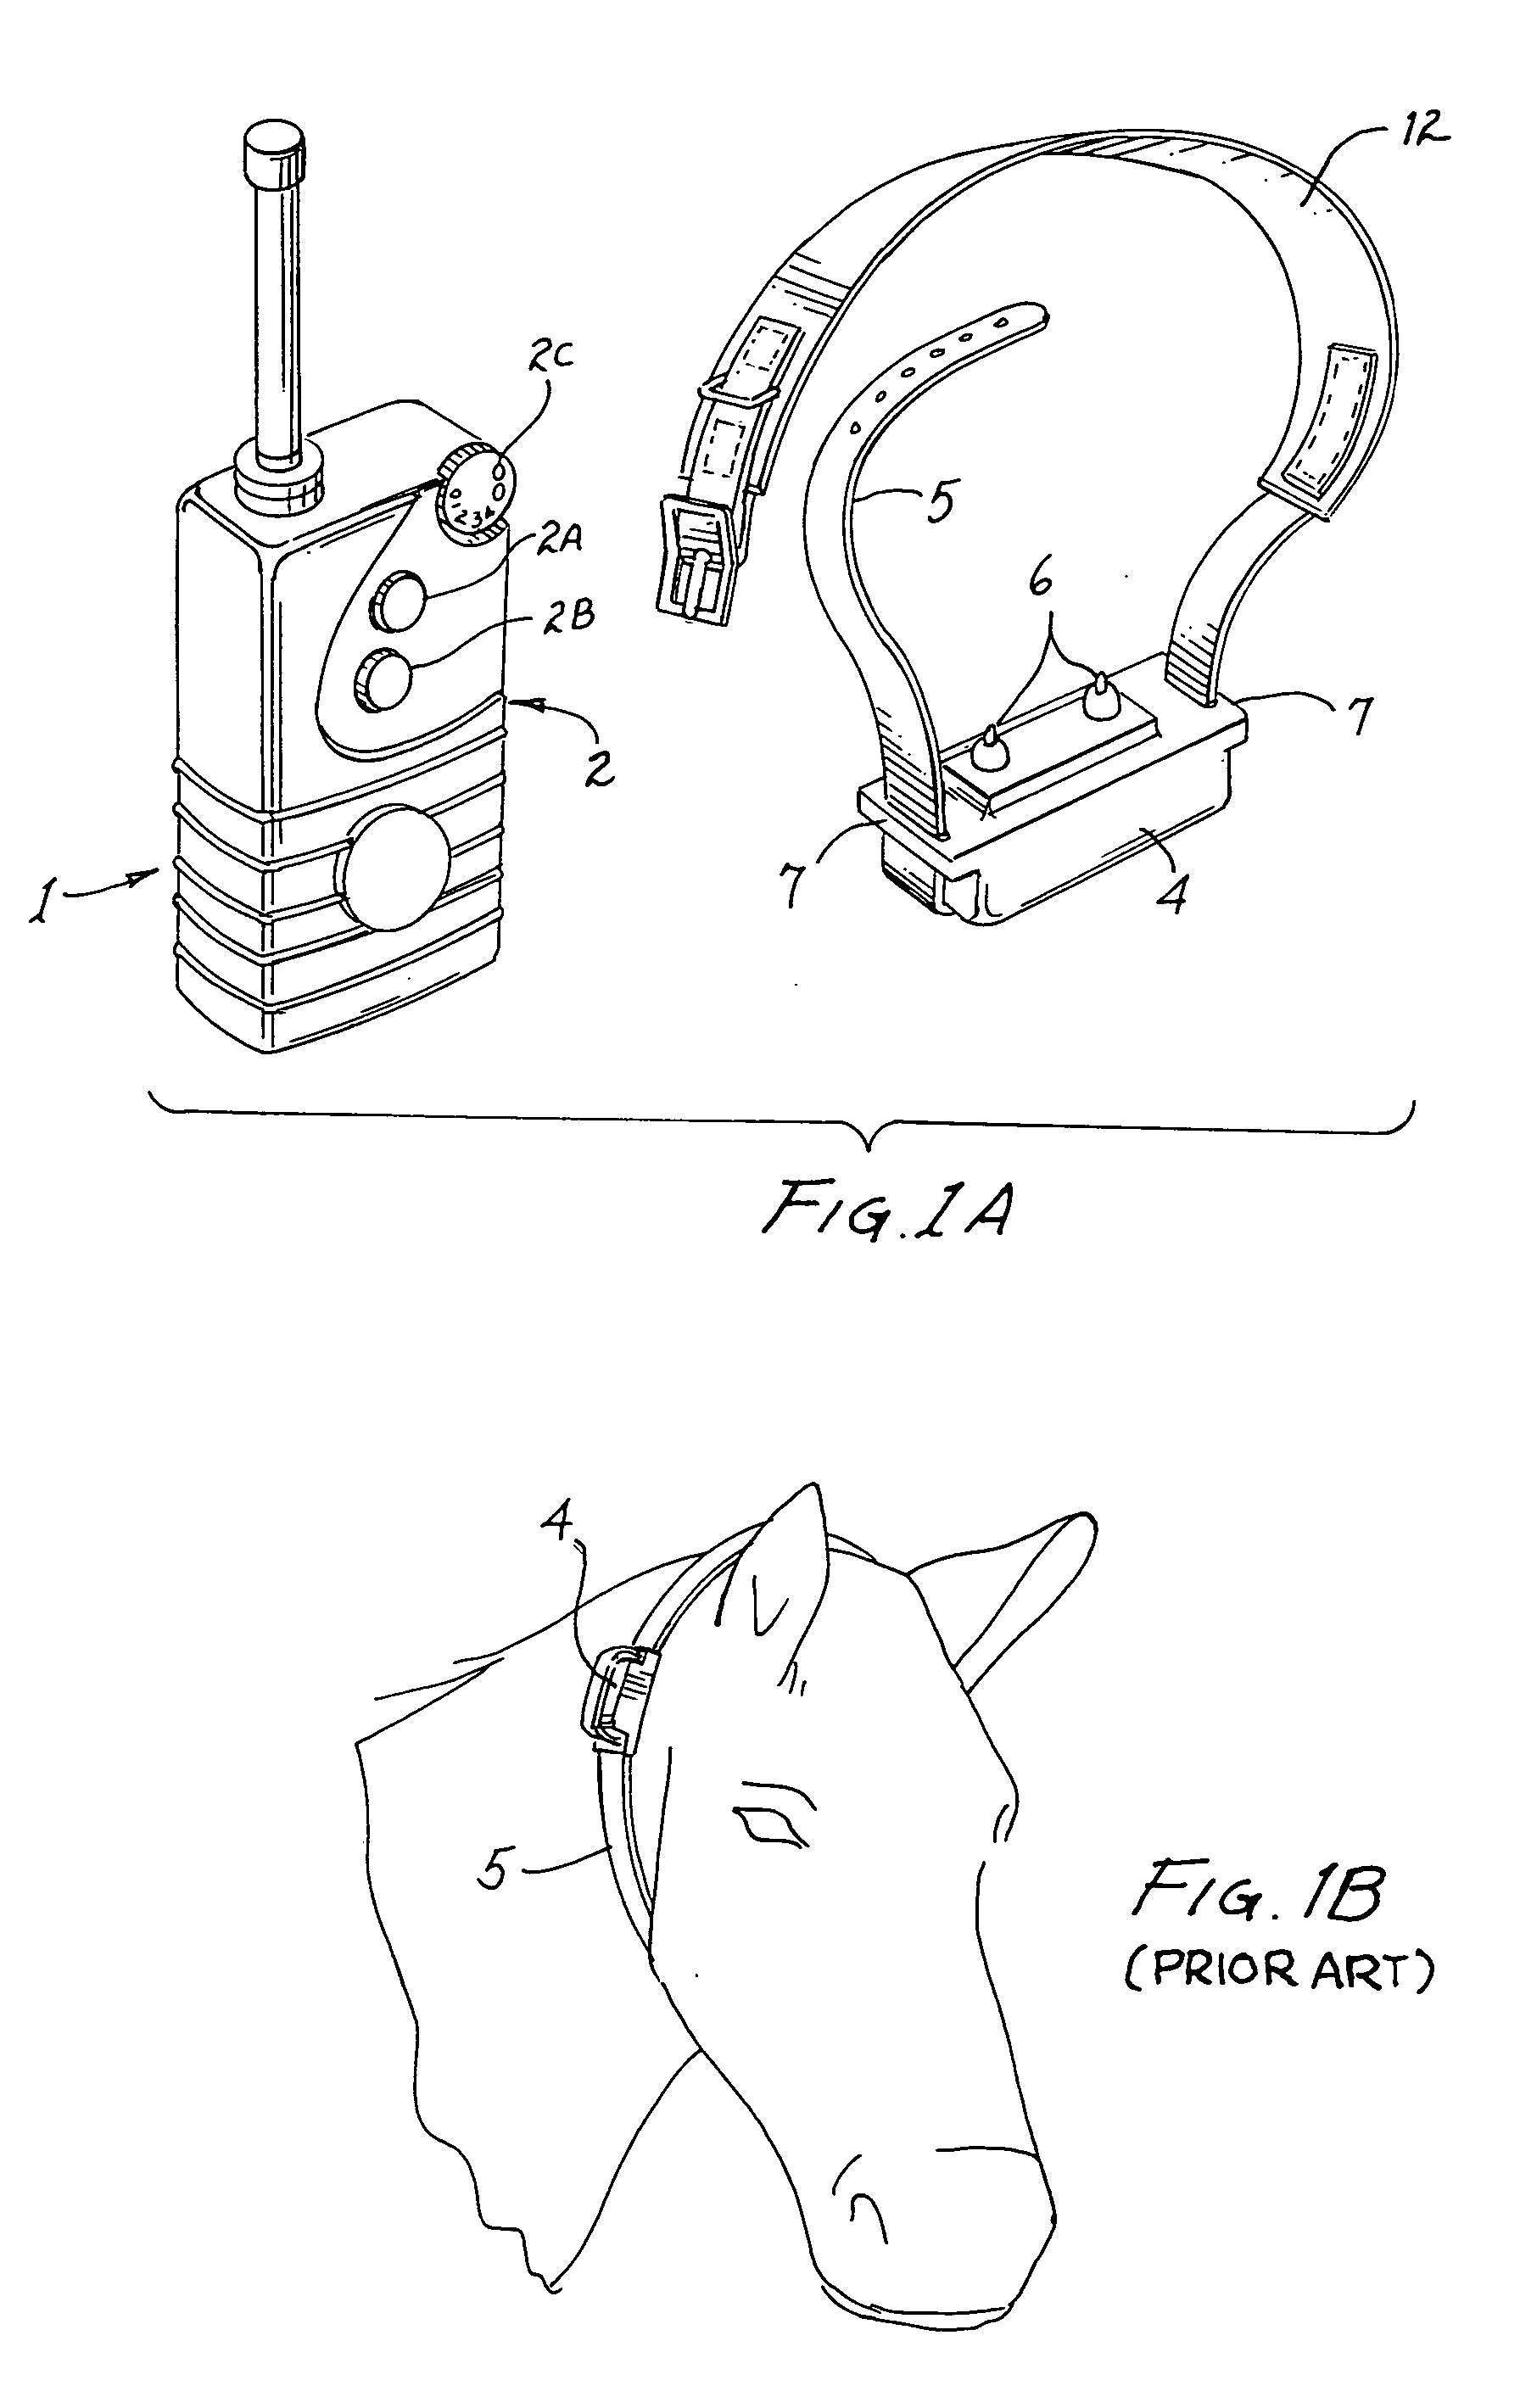 Electronic animal training device support system